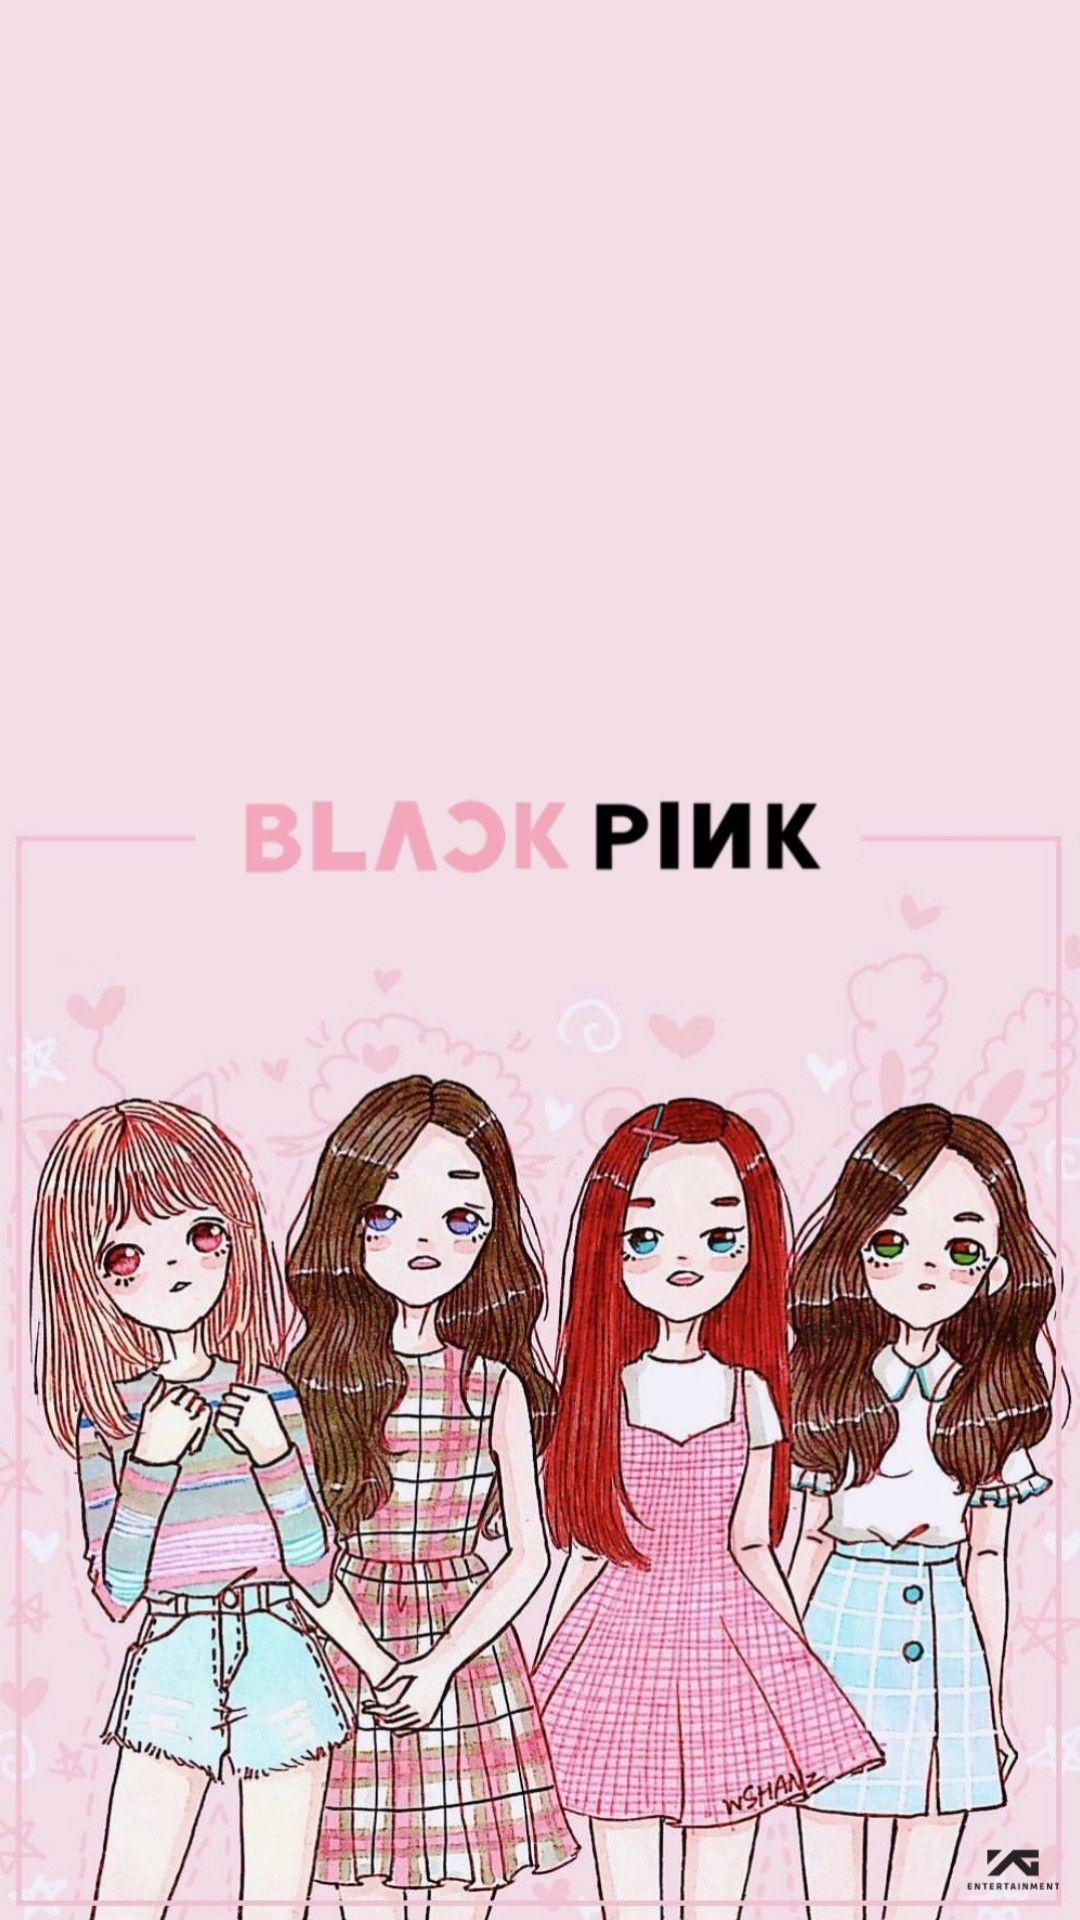 Can I have some blackpink fan art? - Quora